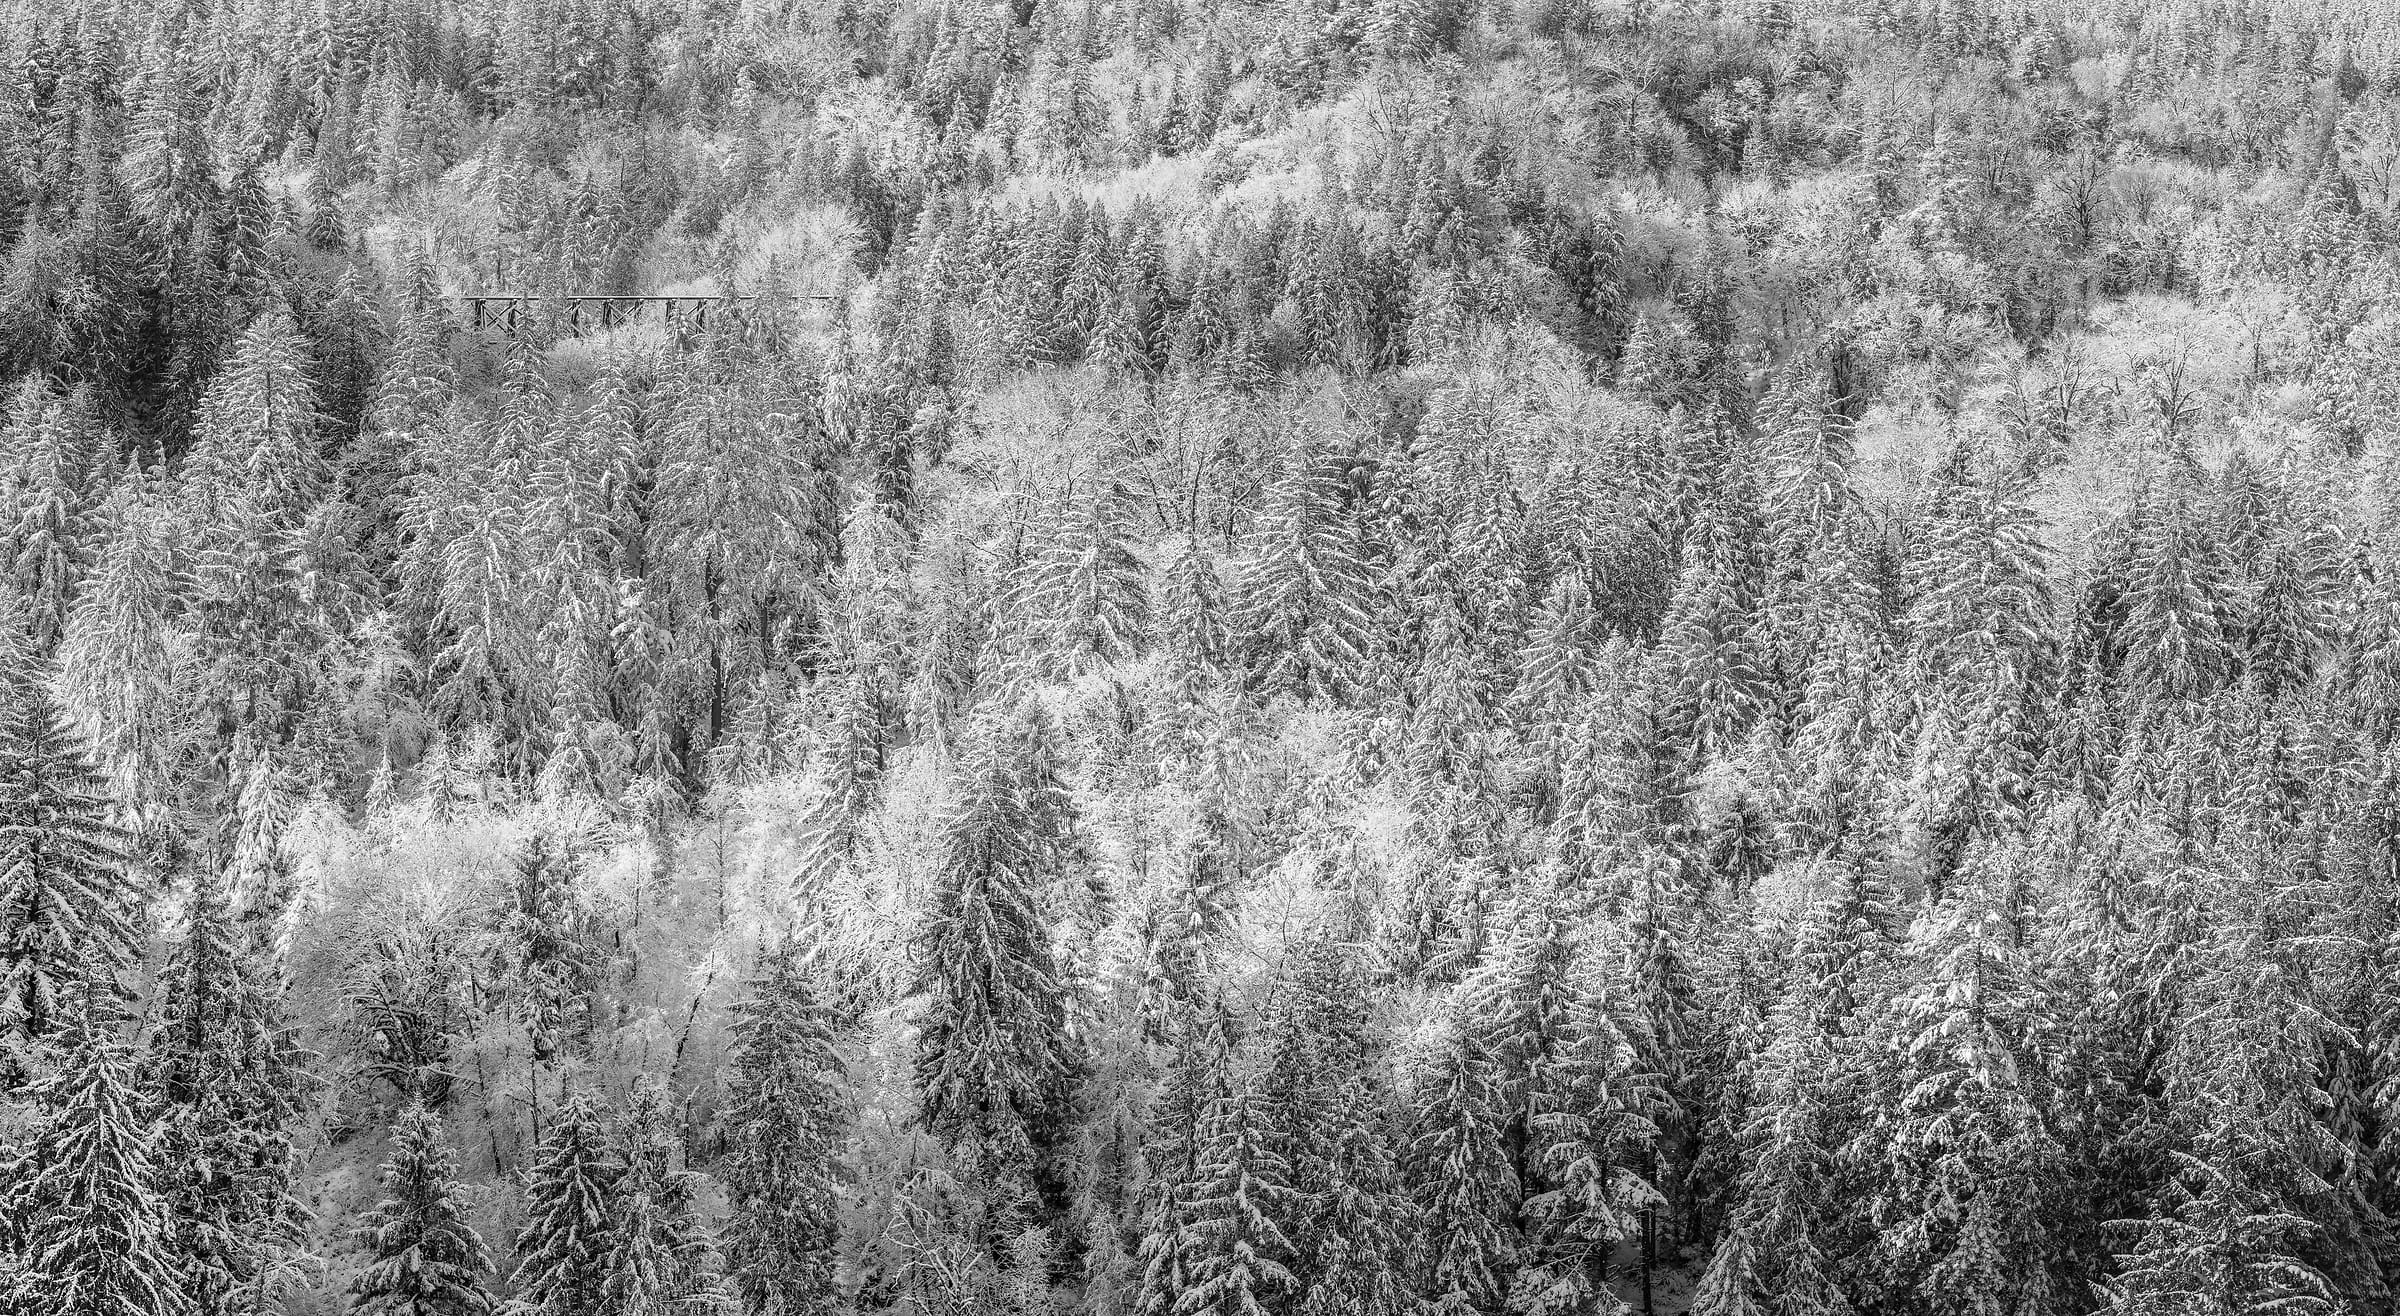 372 megapixels! A very high resolution, large-format VAST photo print of a winter forest scene with trees that have snow on them; black & white landscape photograph created by Scott Rinckenberger in Snoqualmie Falls, Snoqualmie, Washington.